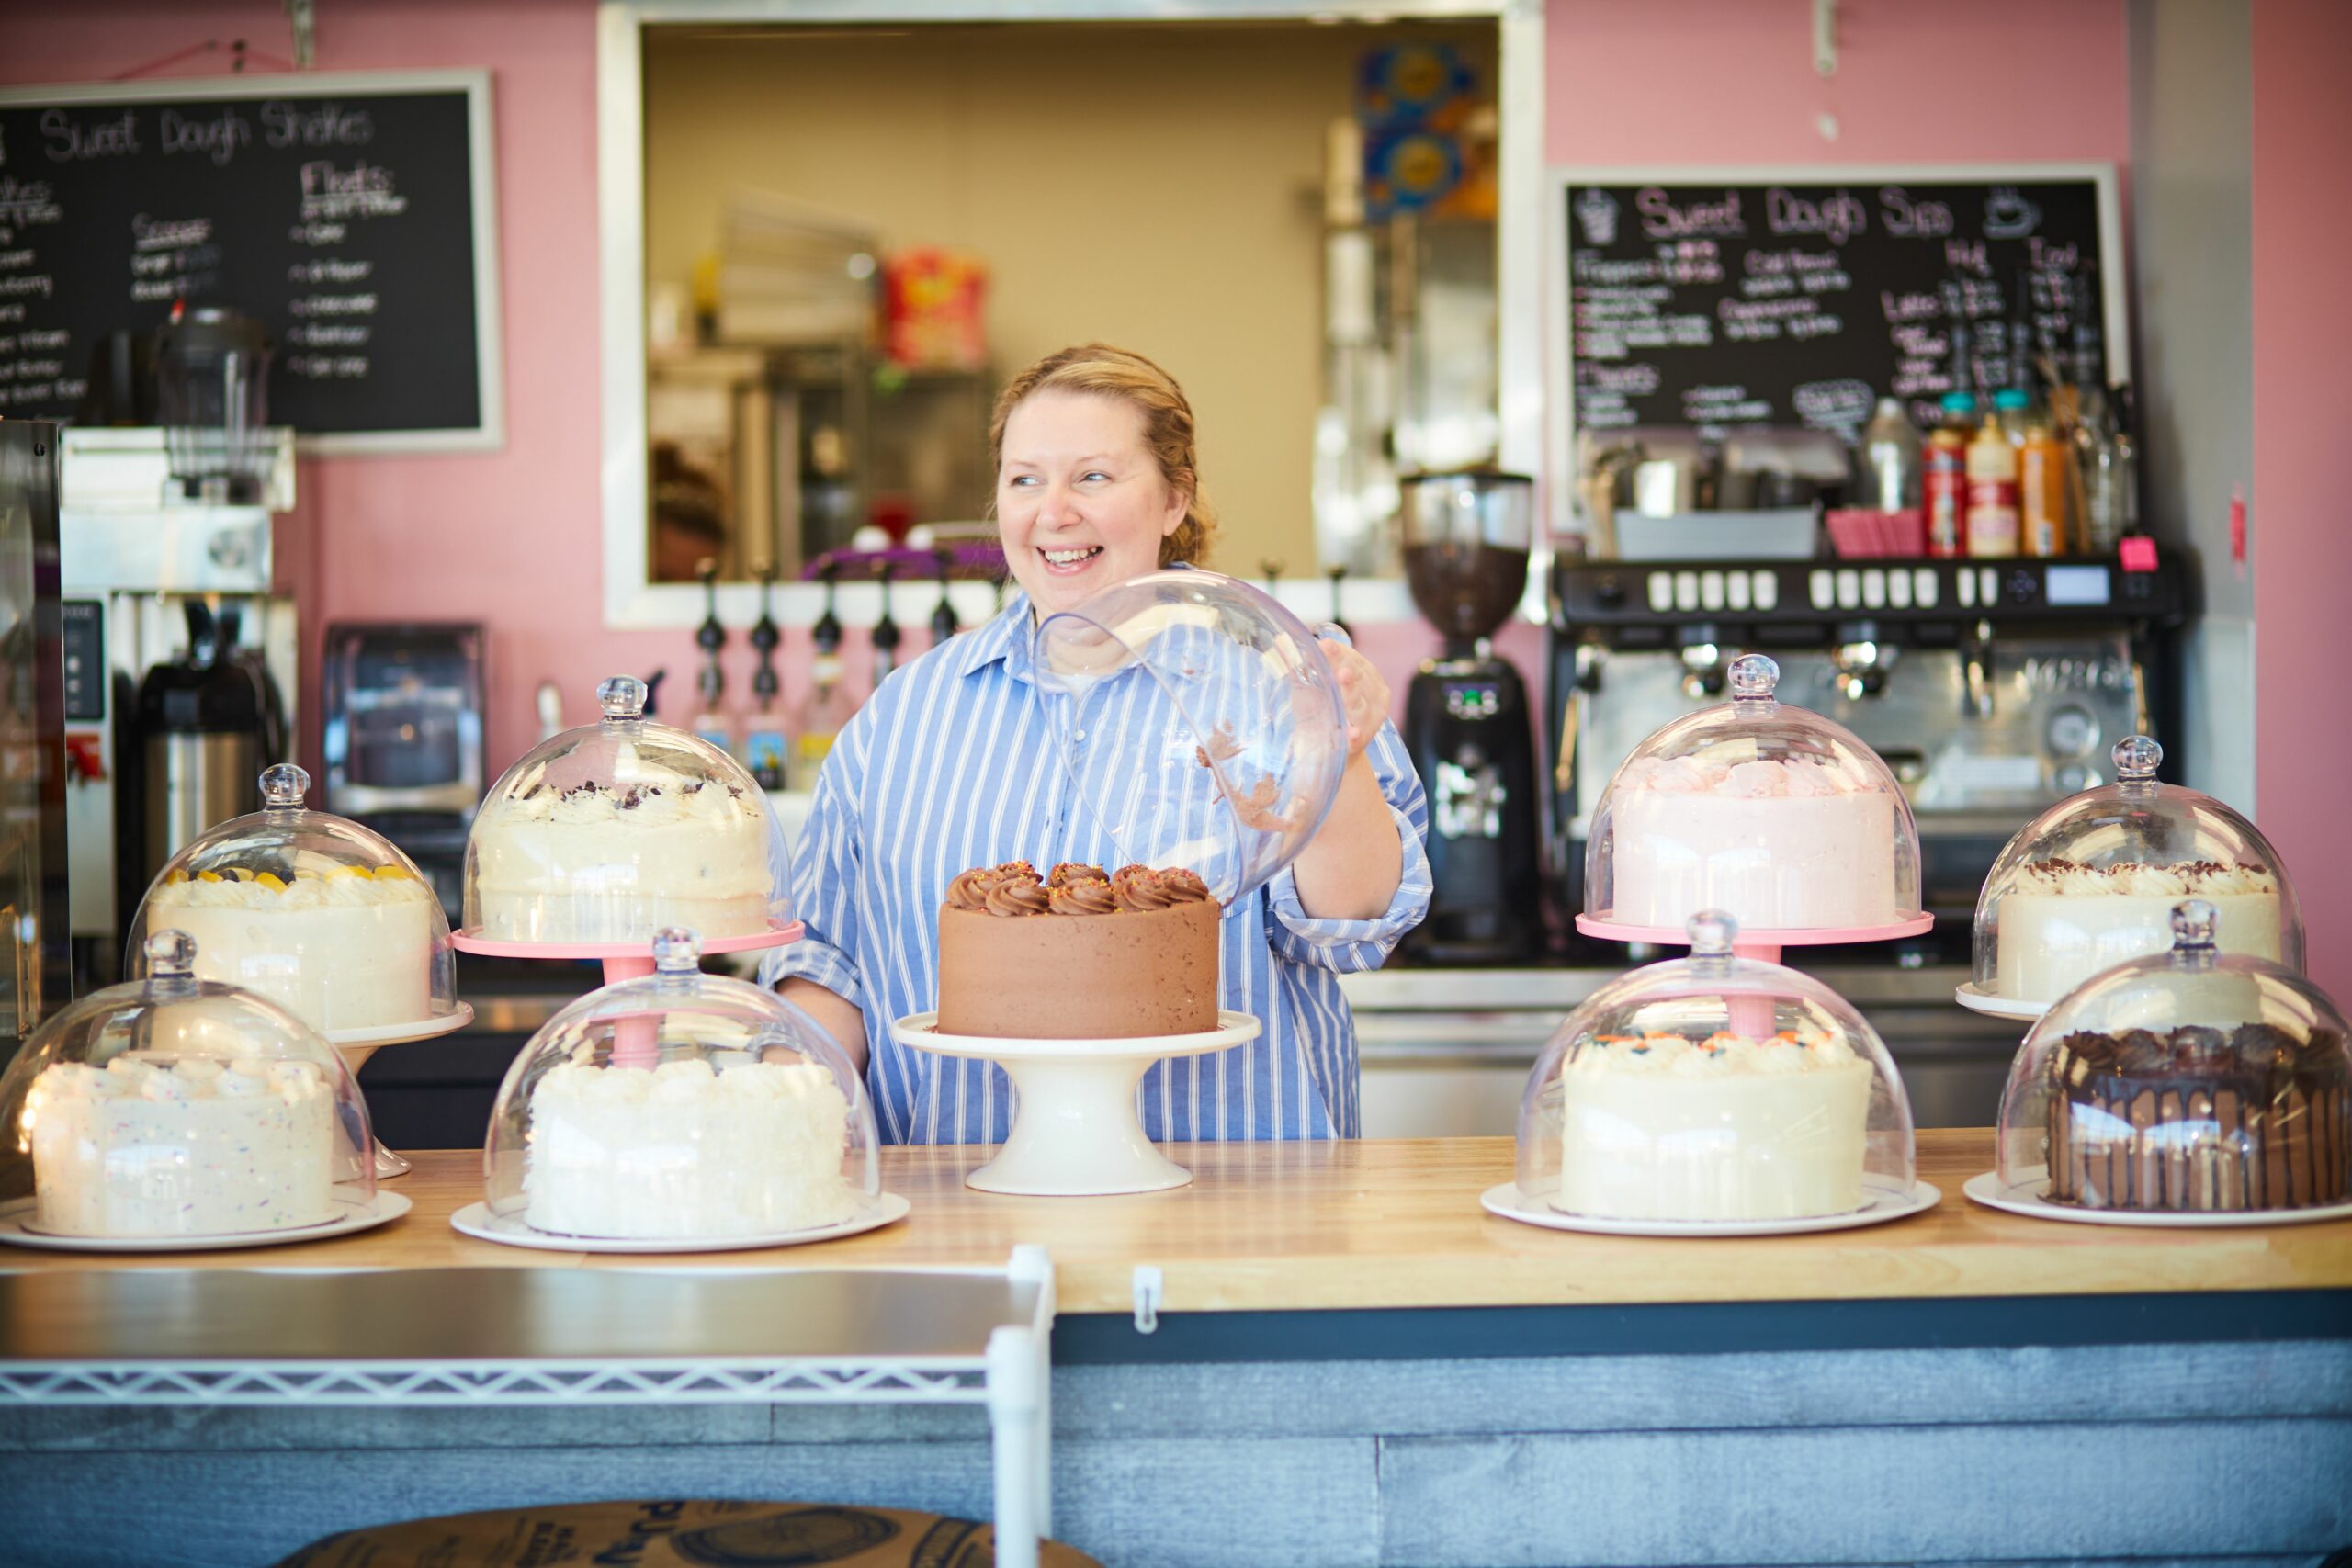 Traci Thompson, owner of Sweet Dough Bake Shop, opens a cake stand in her bakery.